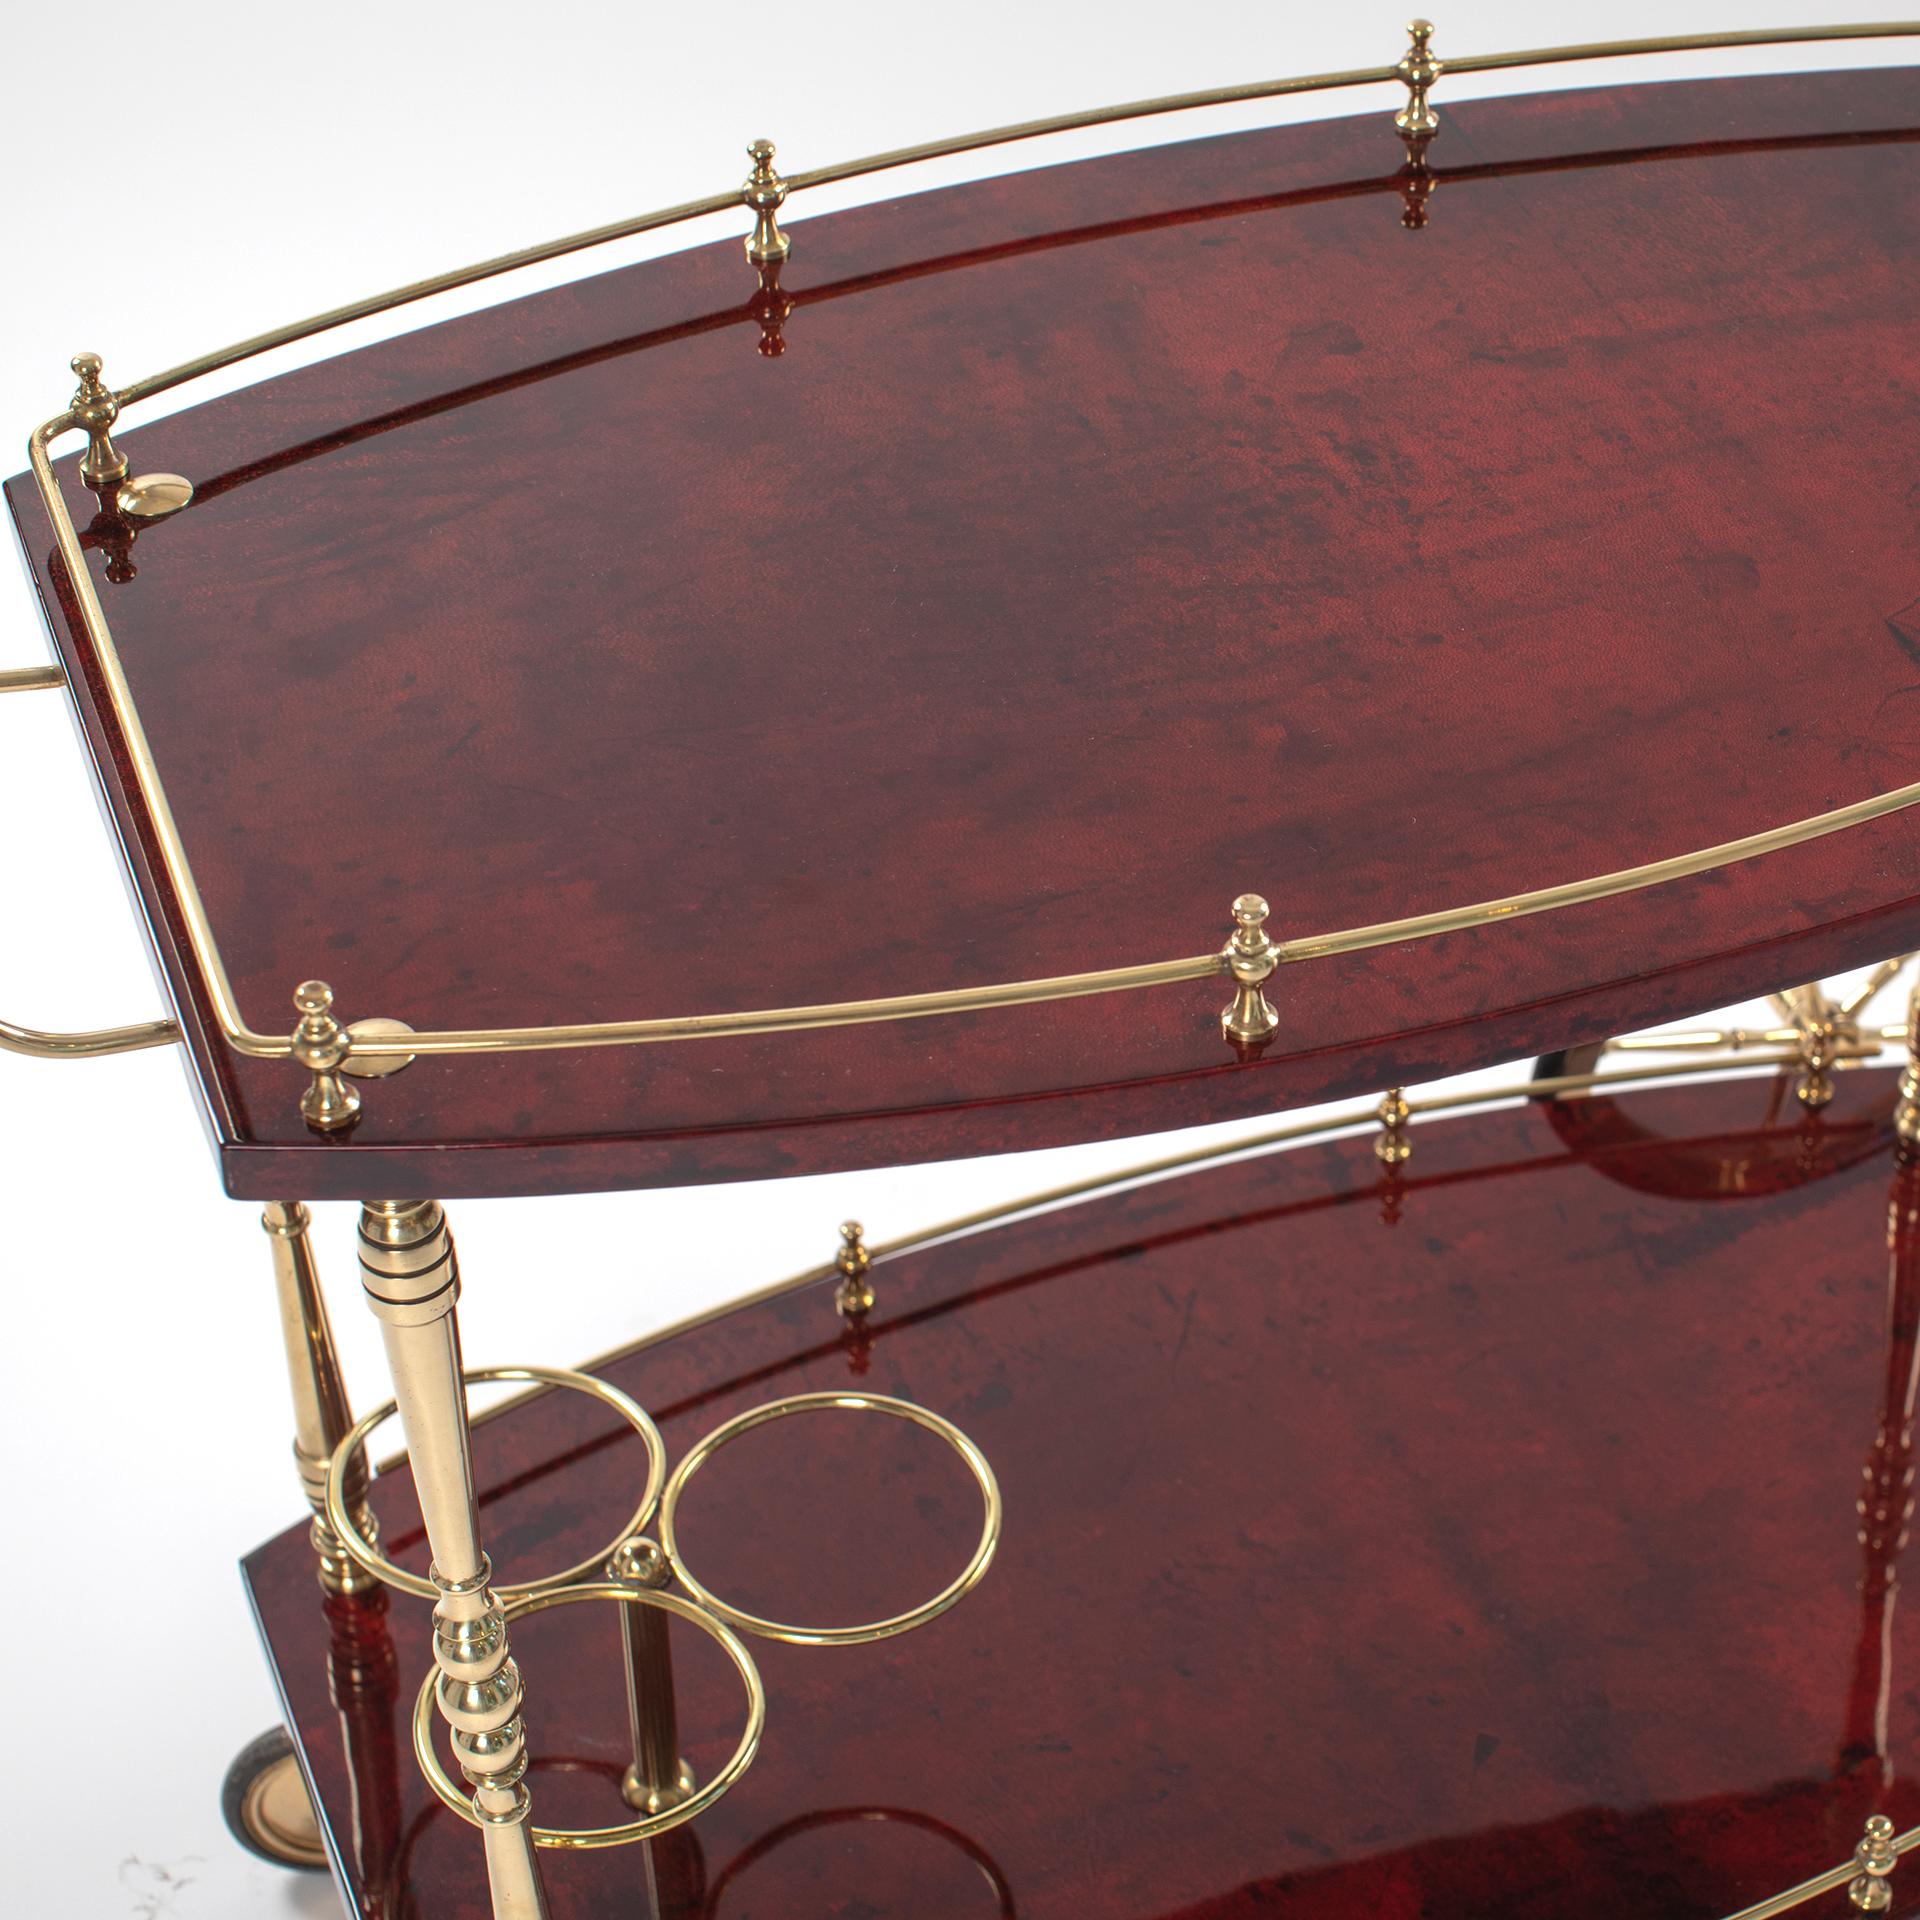 Hand-Crafted Italian Mid-Century Bar Cart in Dark Red Goatskin and Brass by Aldo Tura 1970s For Sale